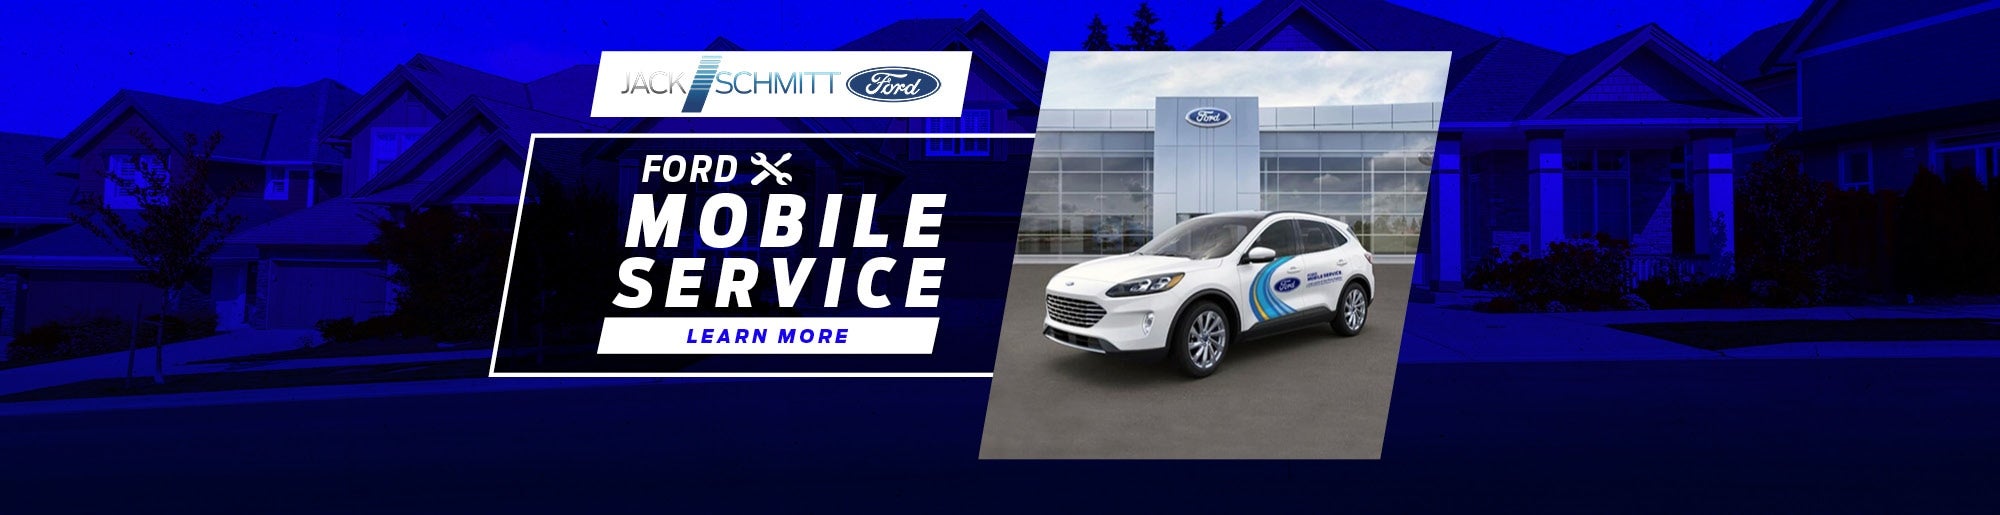 Ford Mobile Service at Jack Schmitt Ford of Collinsville Collinsville IL 